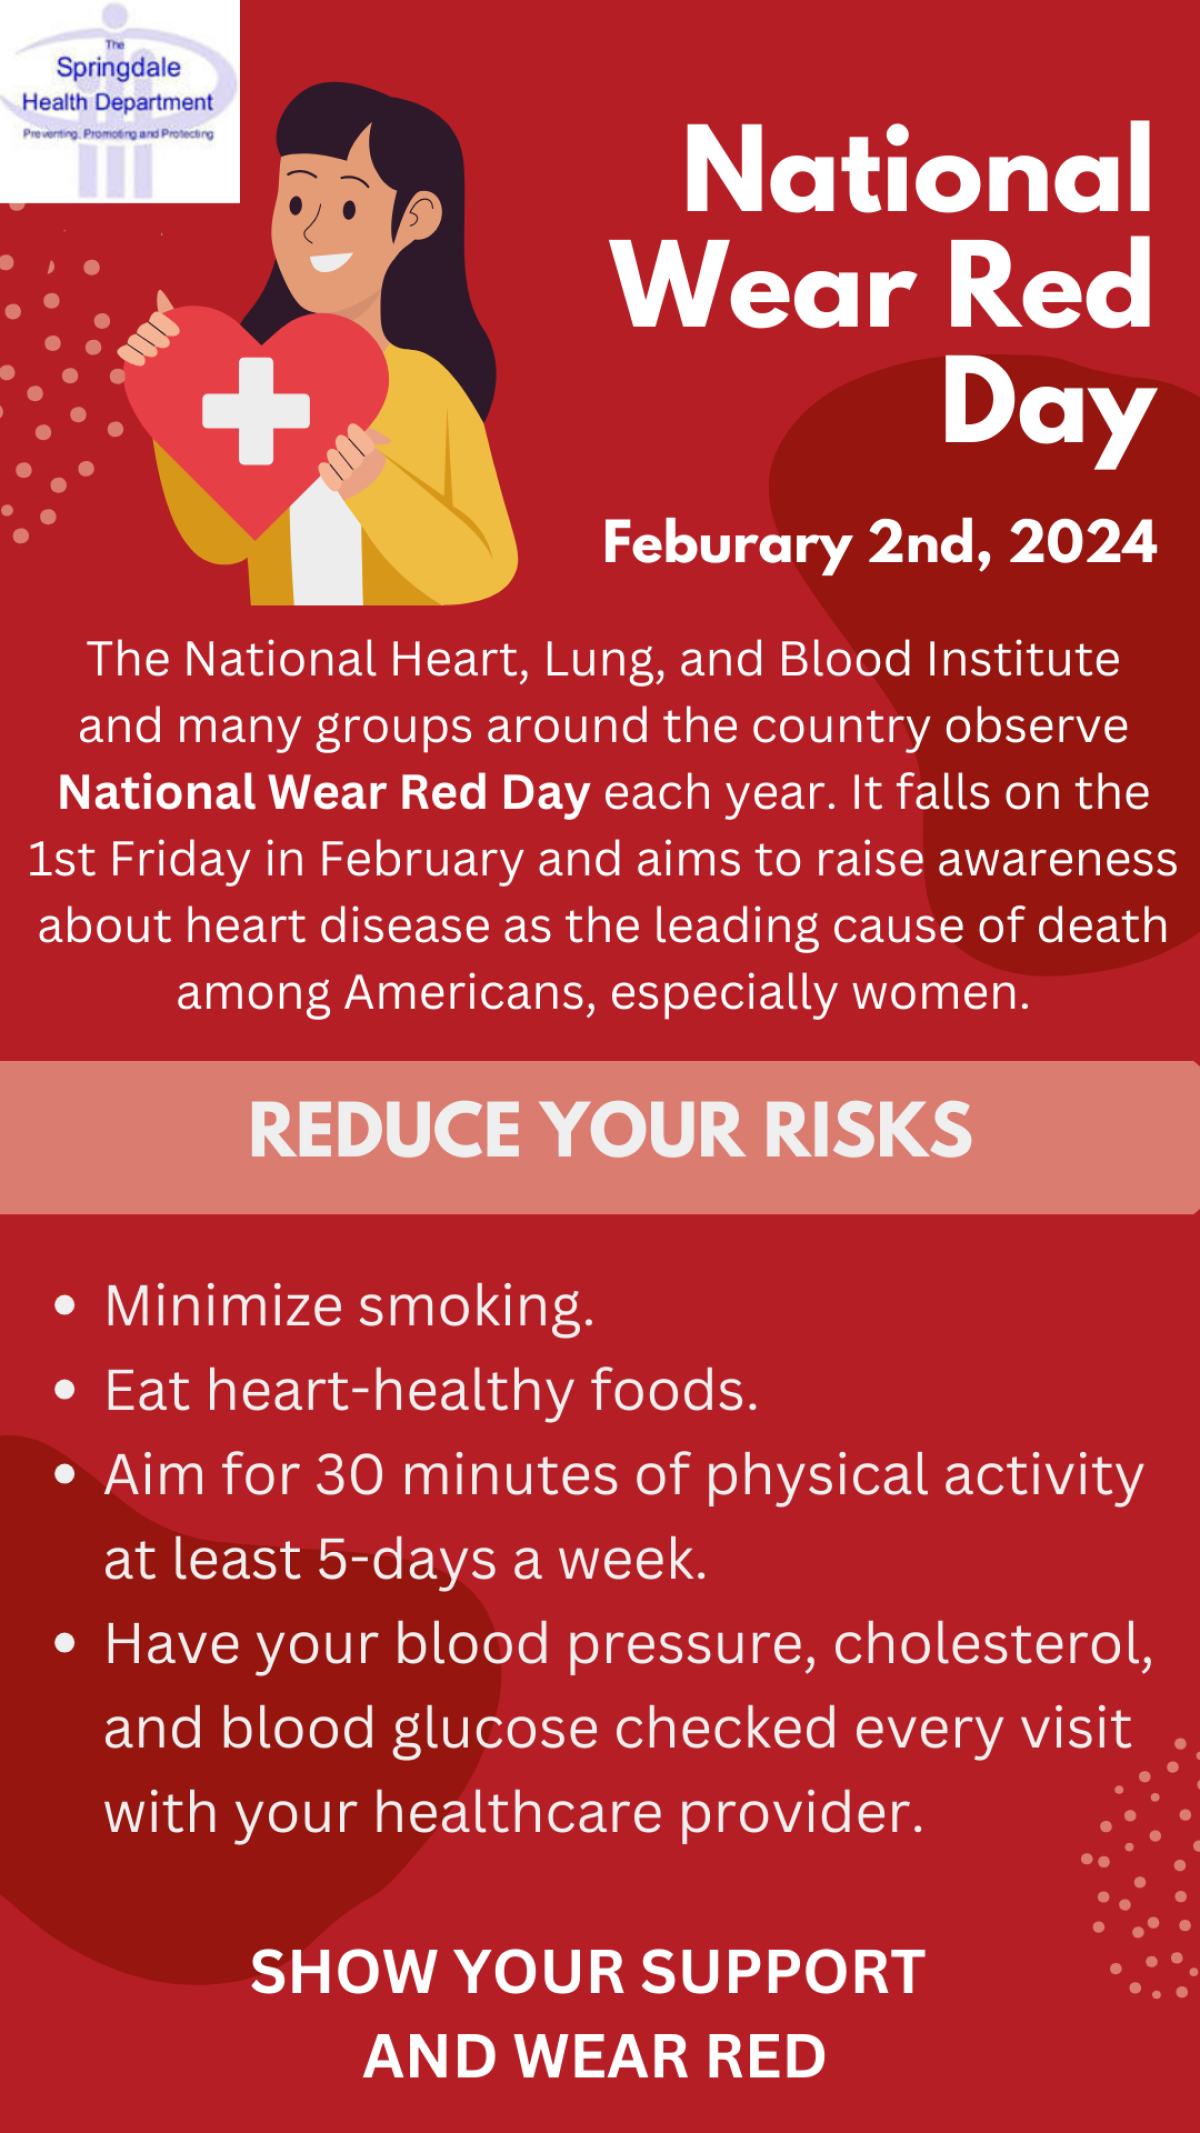 National Wear Red Day - February 2, 2024